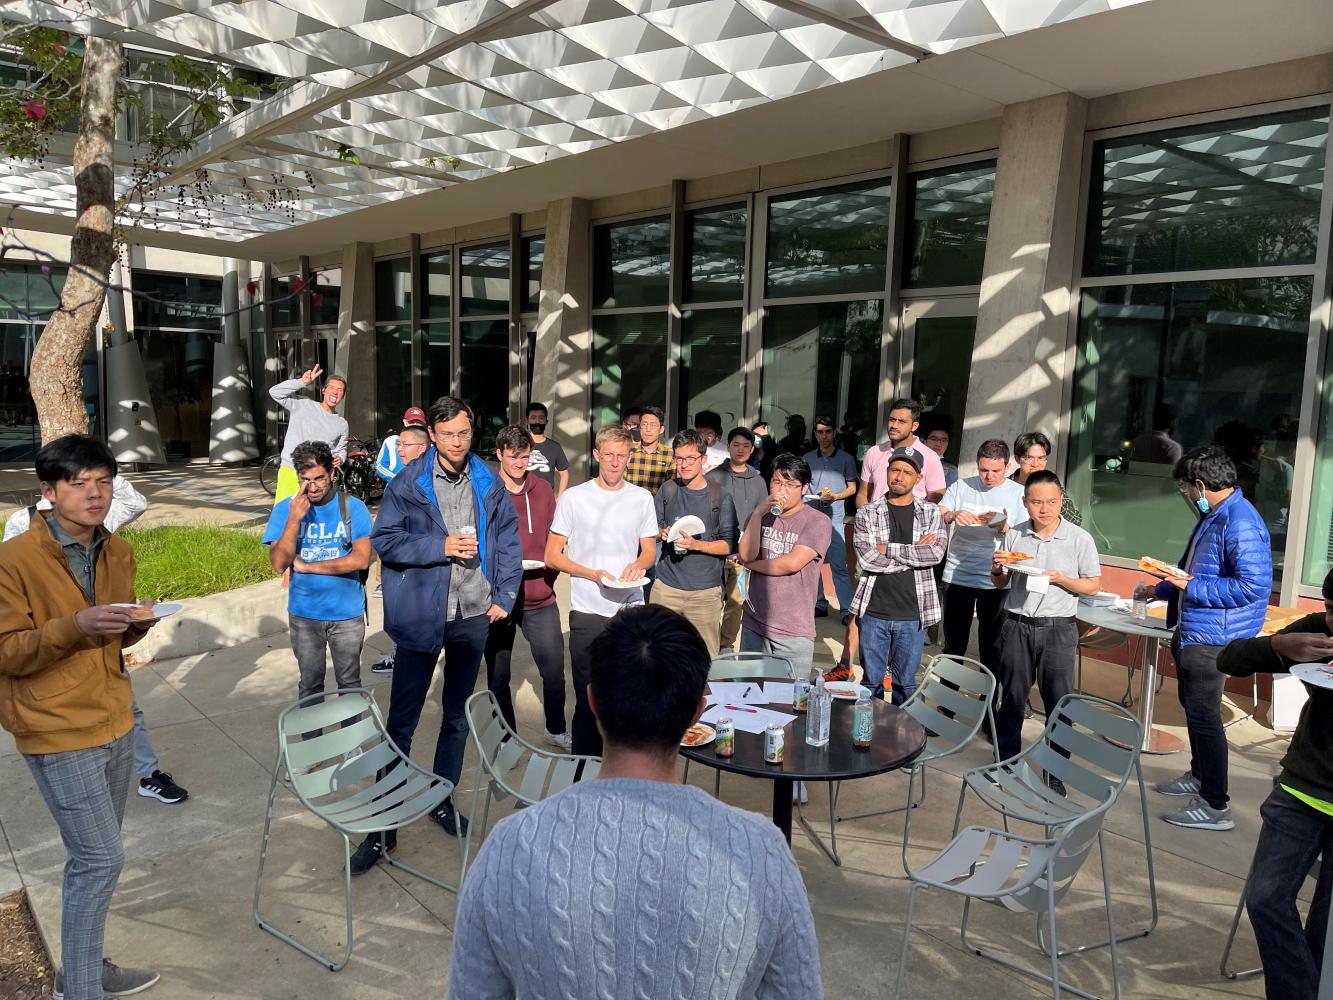 Picture of a group of about 25 RoboGrads members standing and eating pizza while someone give an announcement